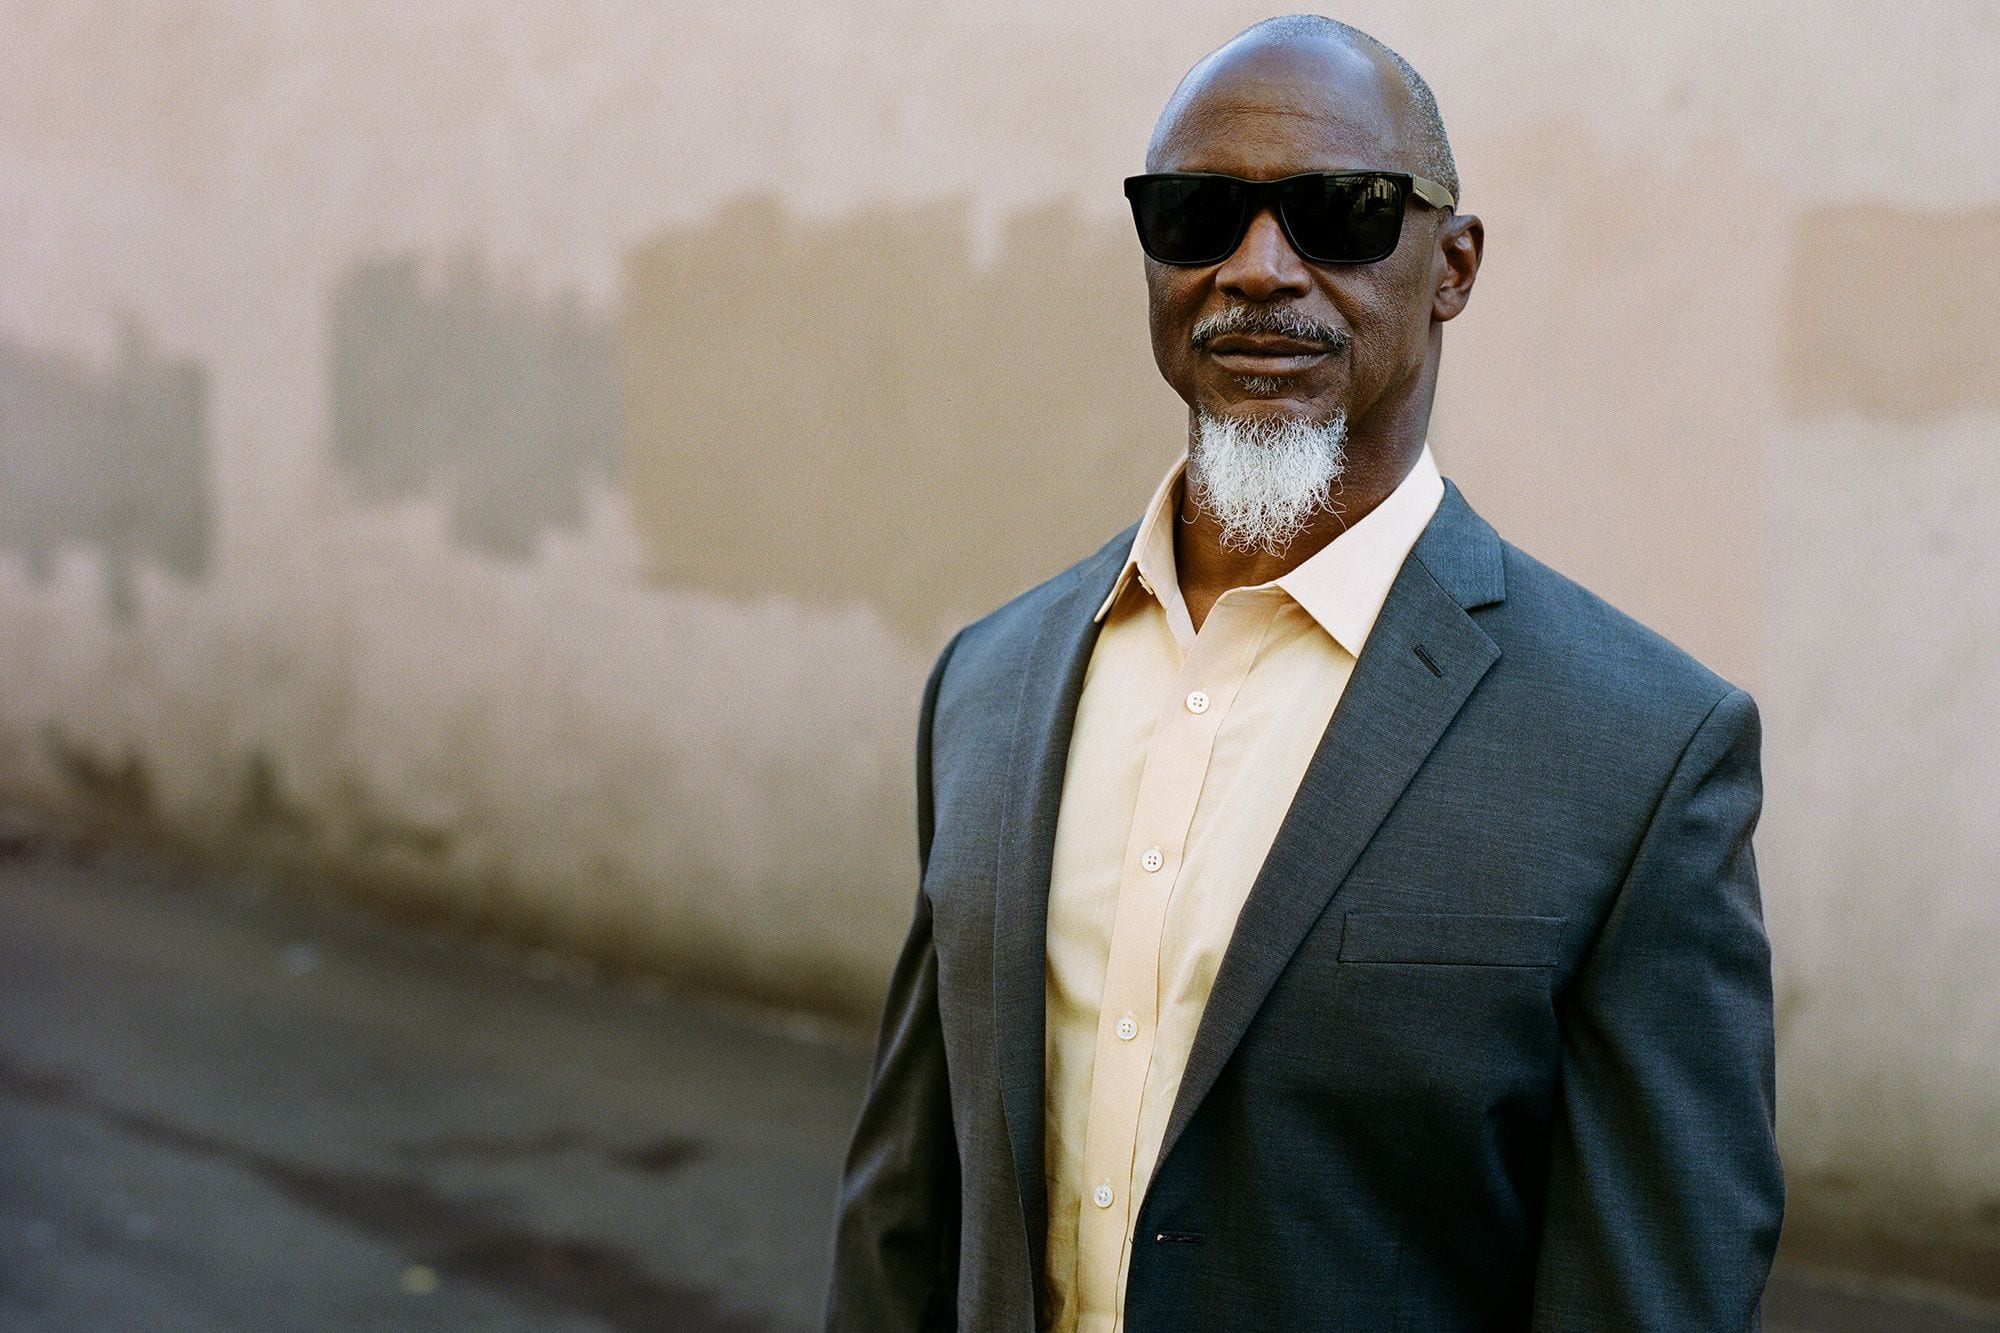 Karl Denson’s Tiny Universe Get Down to Rise Up at the Fillmore